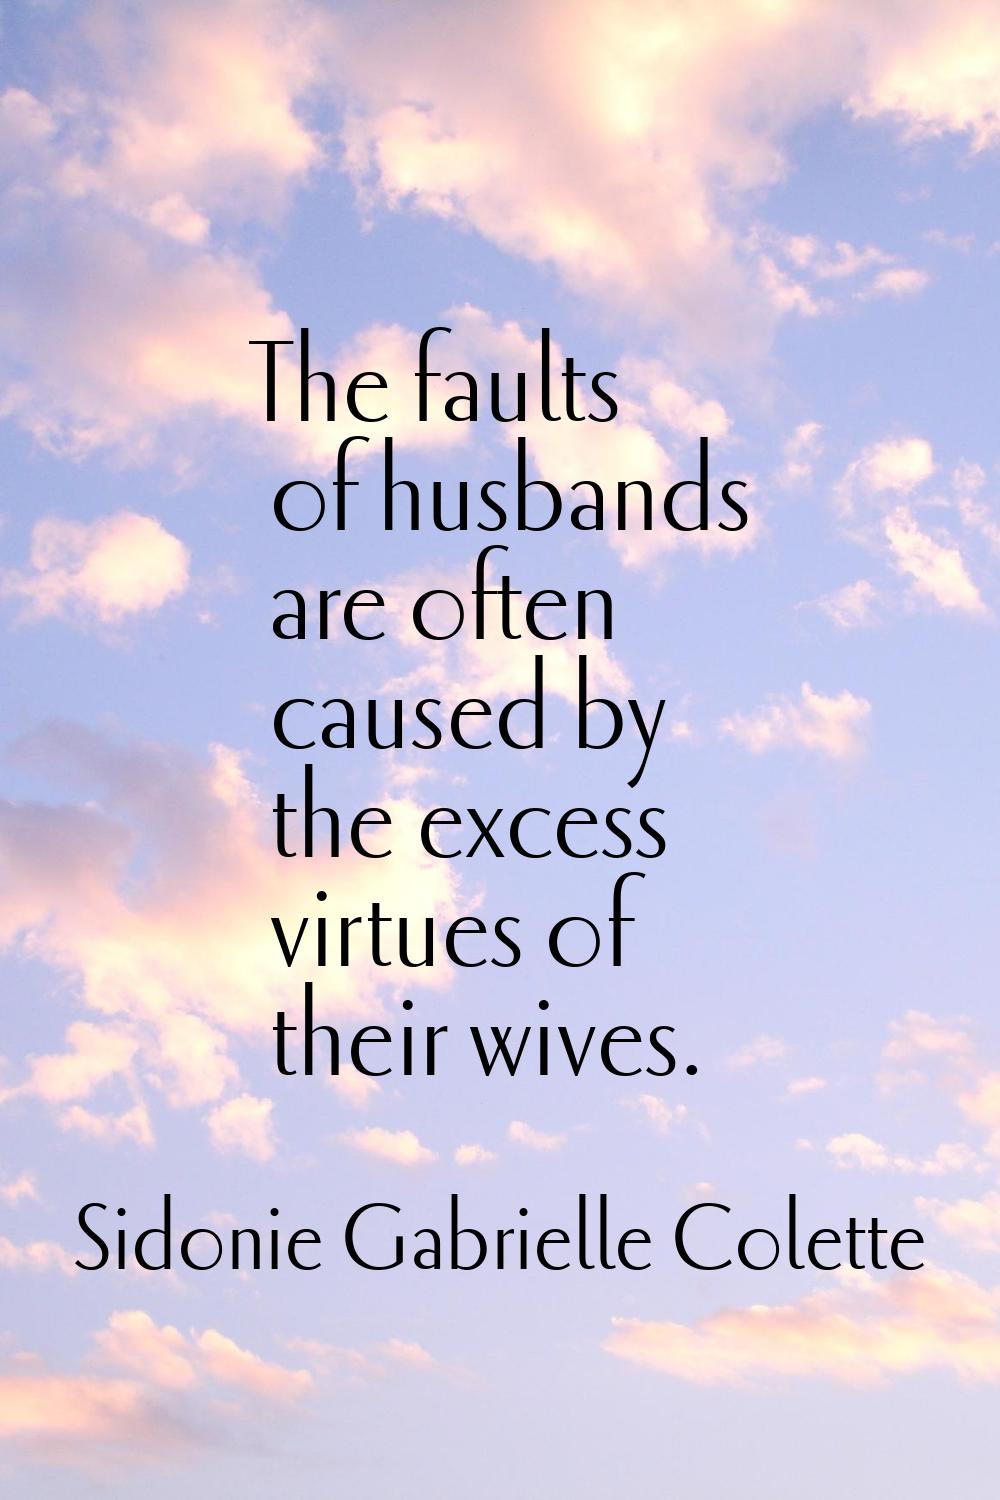 The faults of husbands are often caused by the excess virtues of their wives.